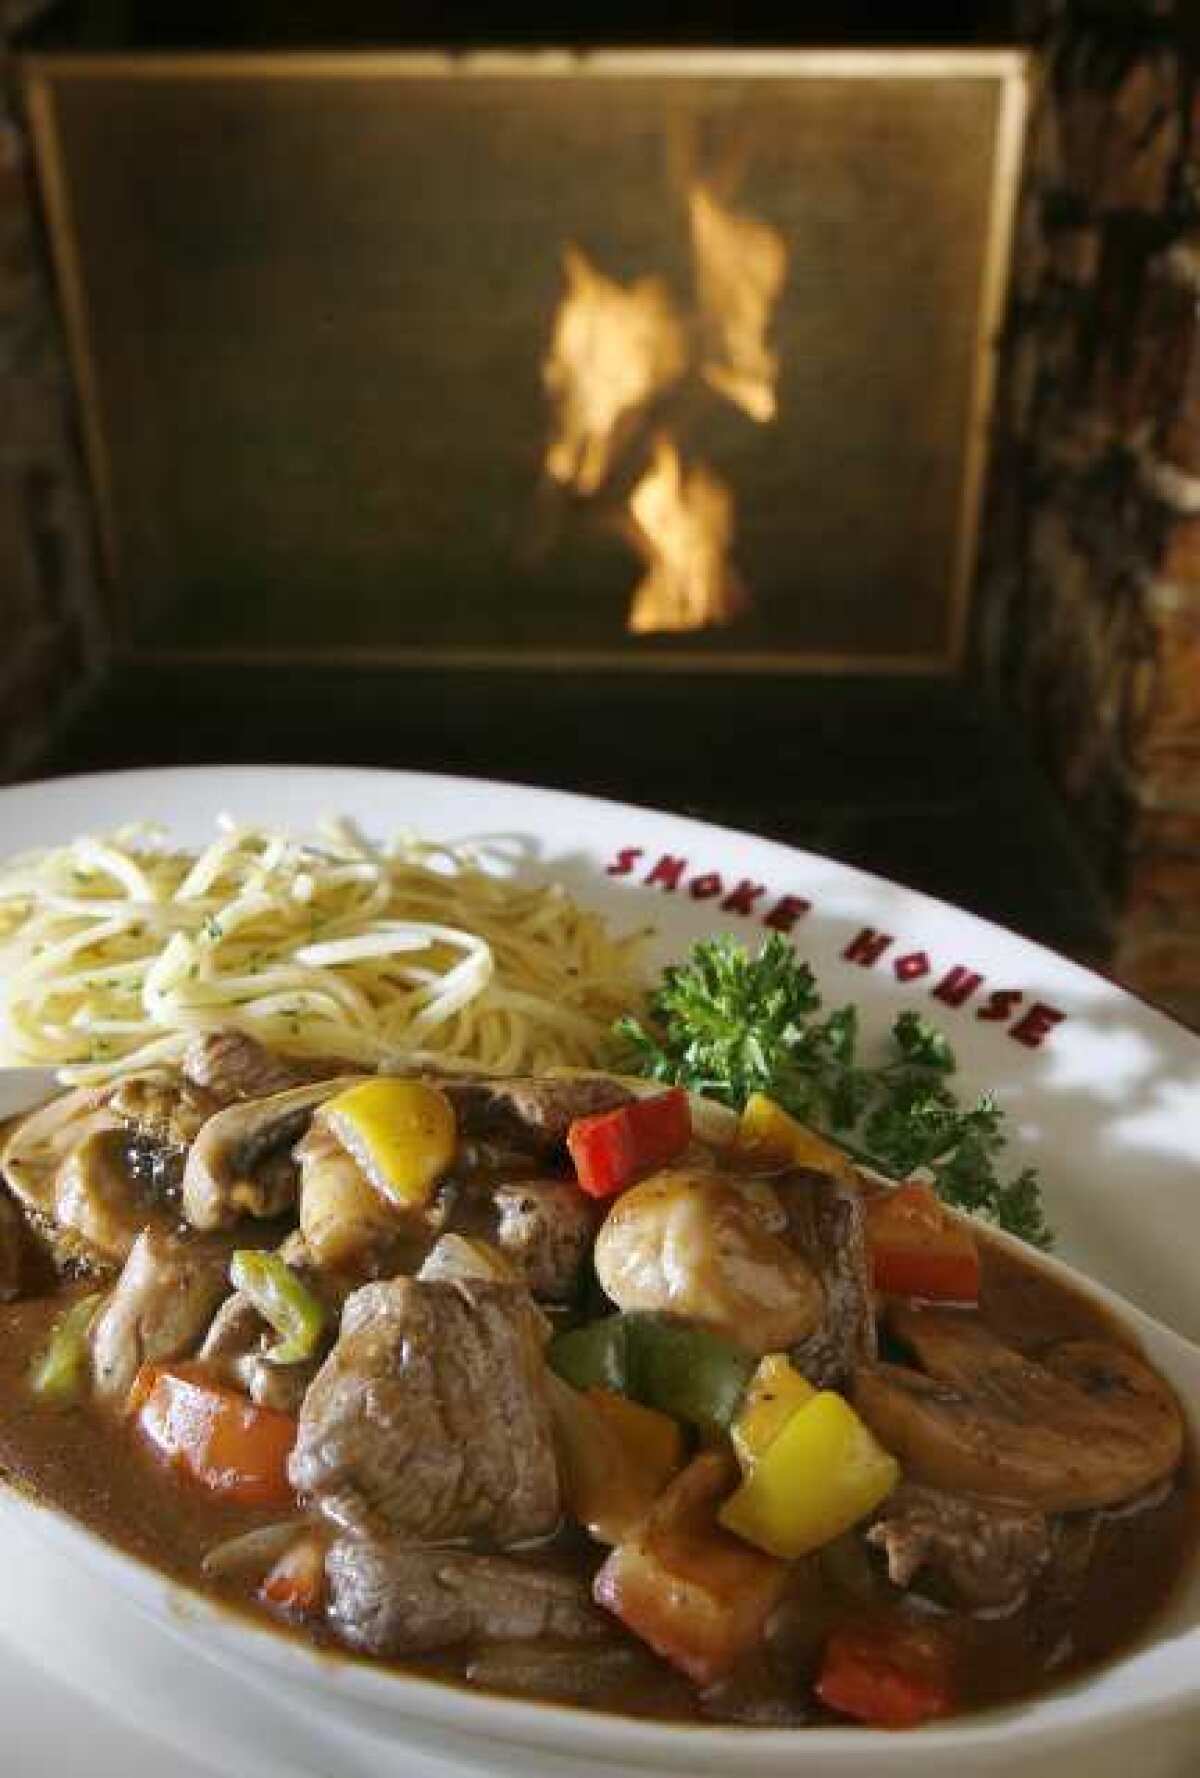 Steak Sinatra, of tenderloin chunks in a stew-like broth with mushrooms and vegetables, served with pasta at SmokeHouse in Burbank.